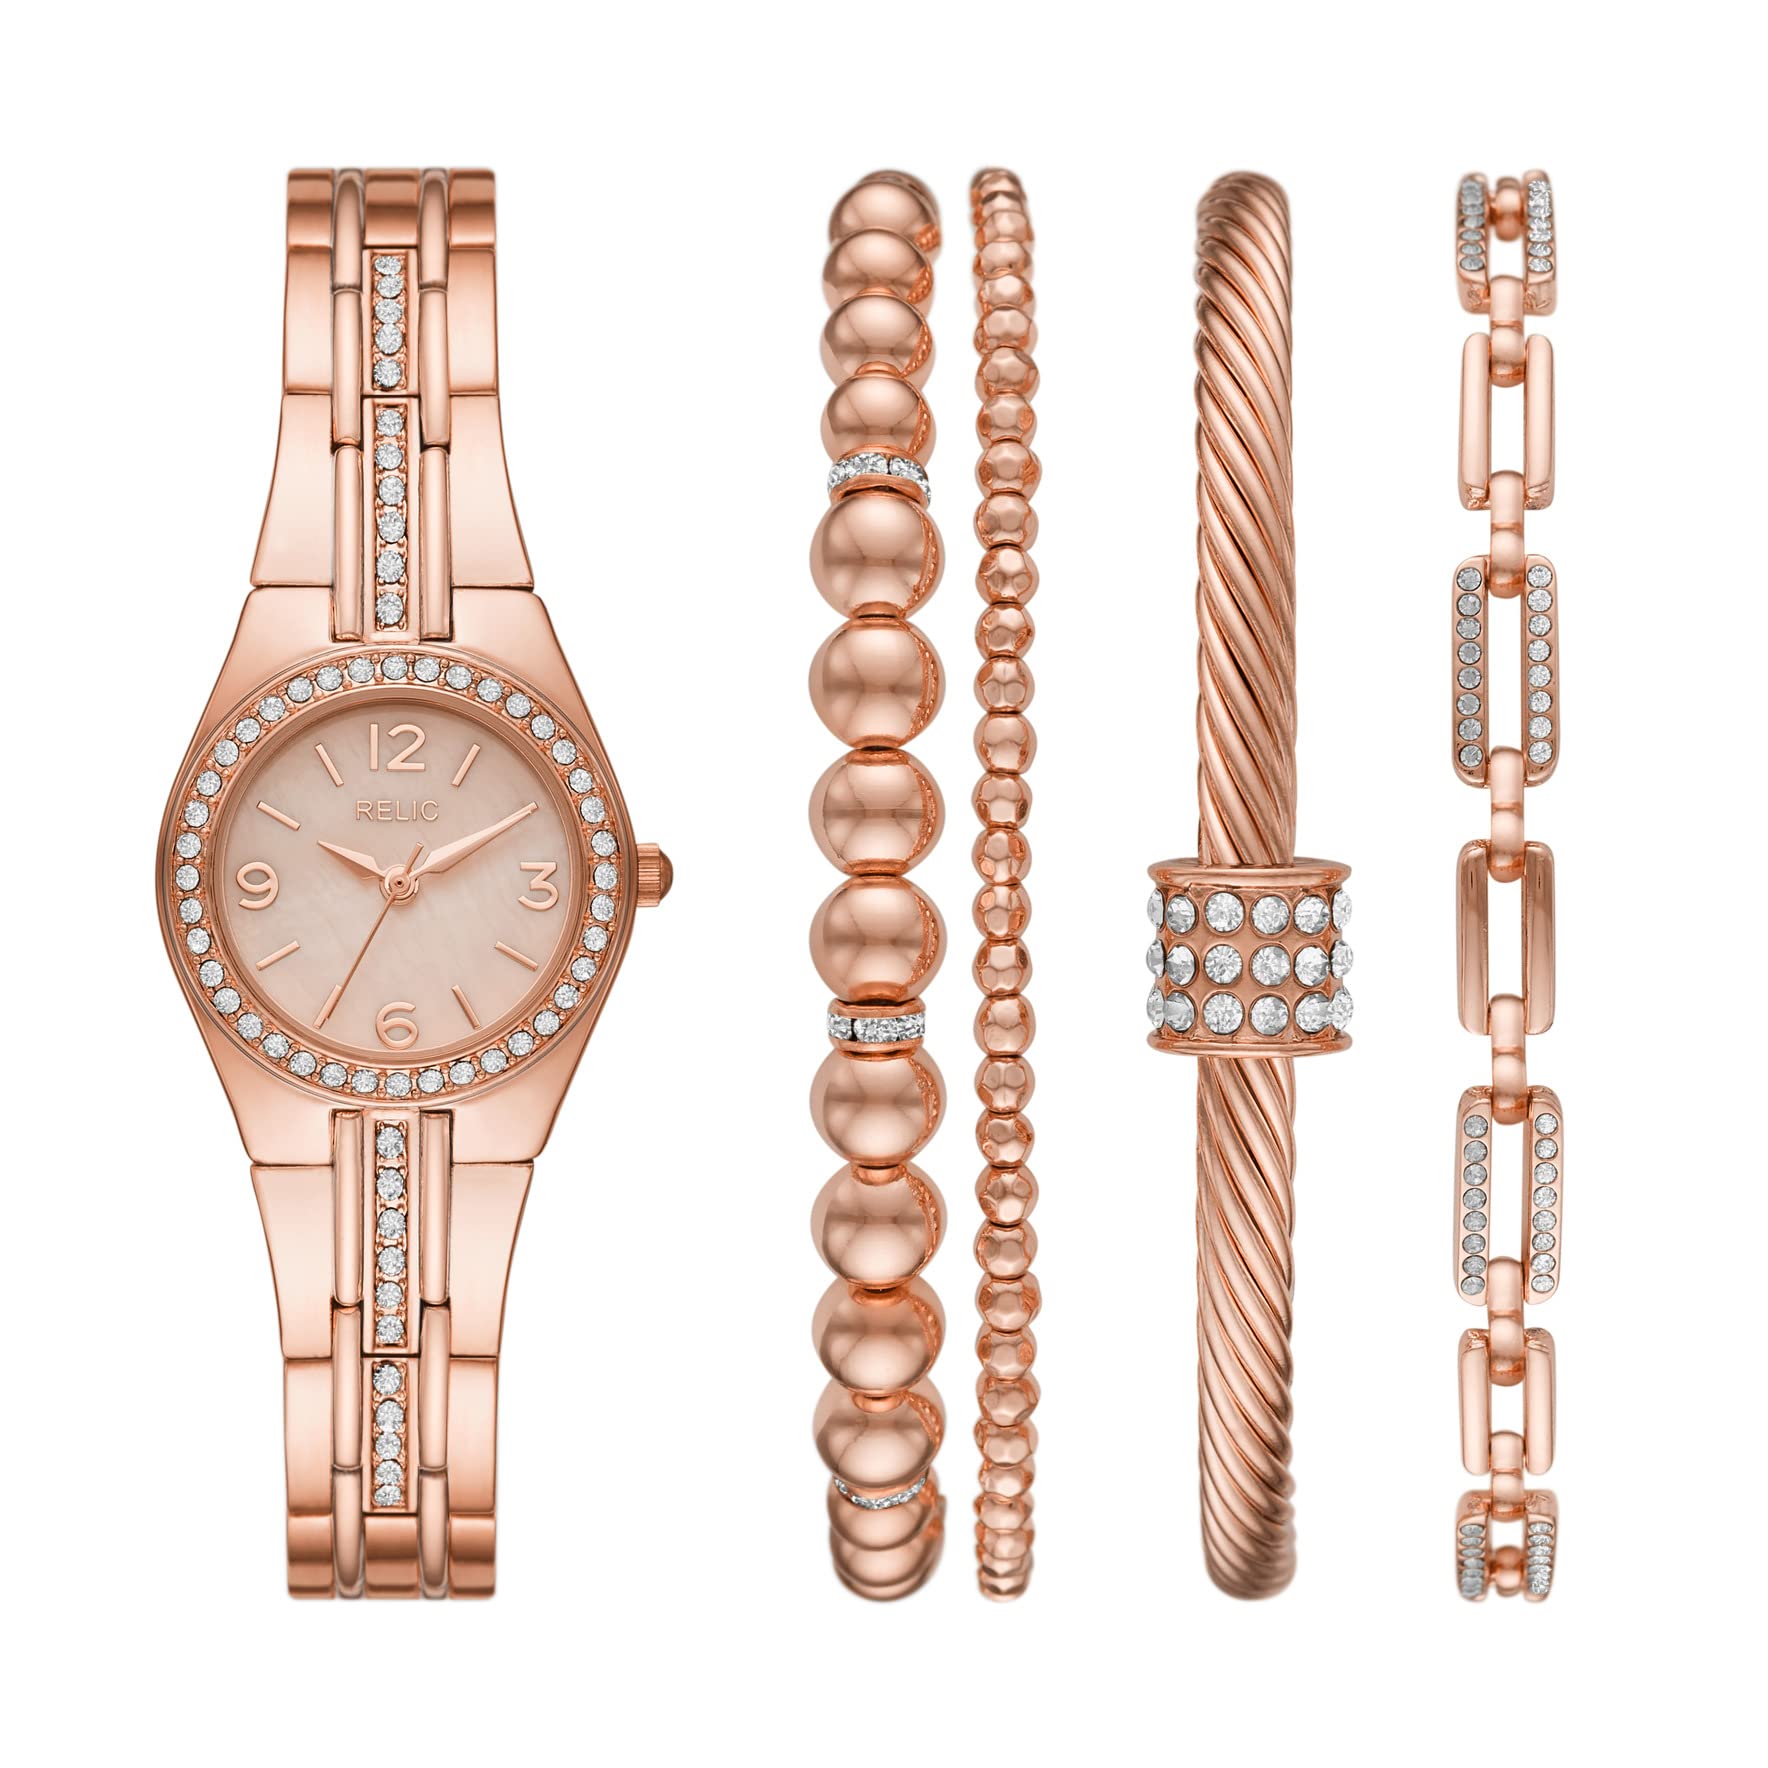 Queens Court Three-Hand Rose Gold Tone Metal Watch Gift Set with Bracelet Accessories Model ZR97001